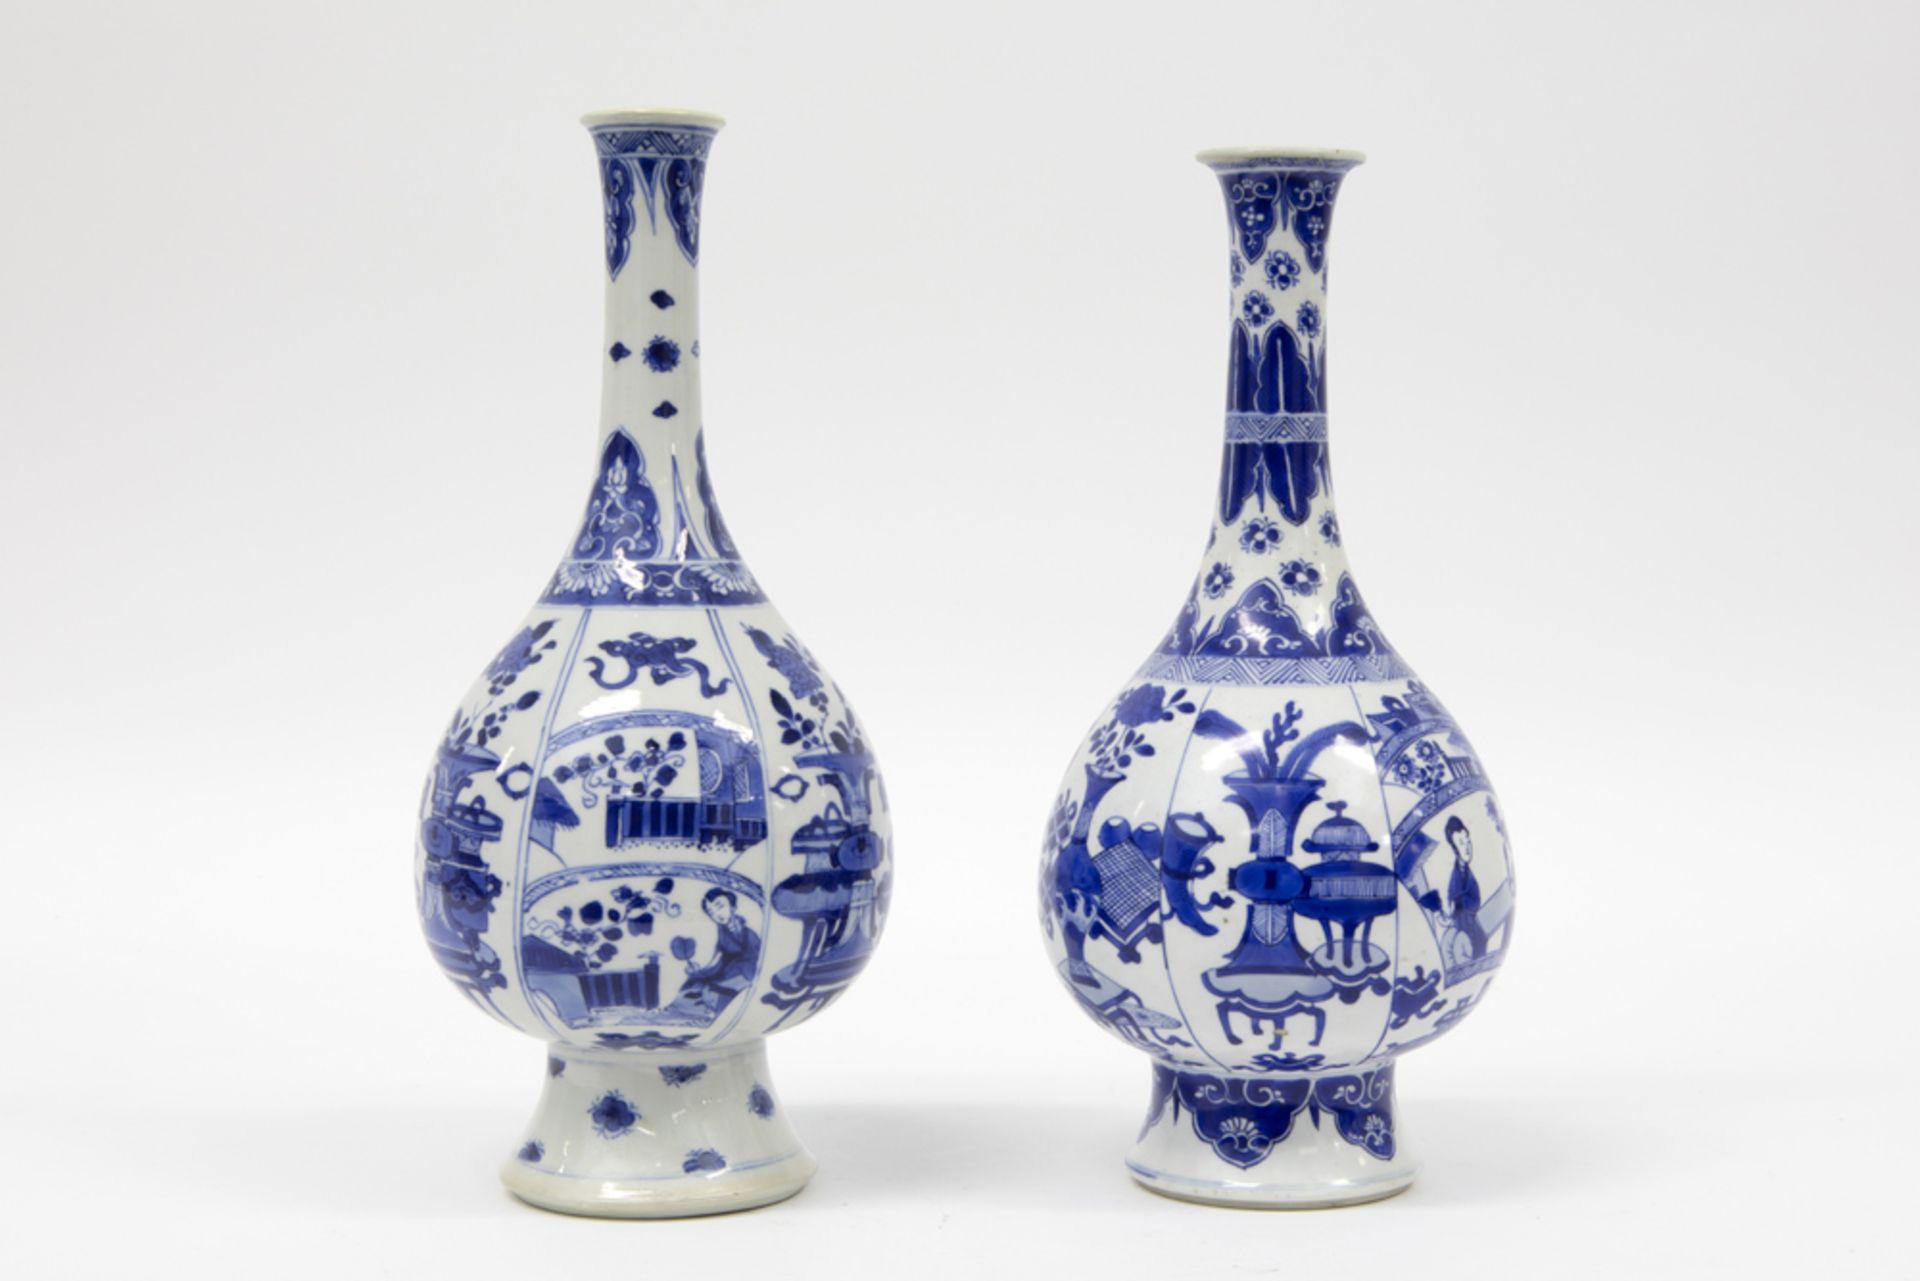 two 17th/18th Cent. Chinese Kang Hsi period vases in porcelain with finely executed blue-white - Image 4 of 6